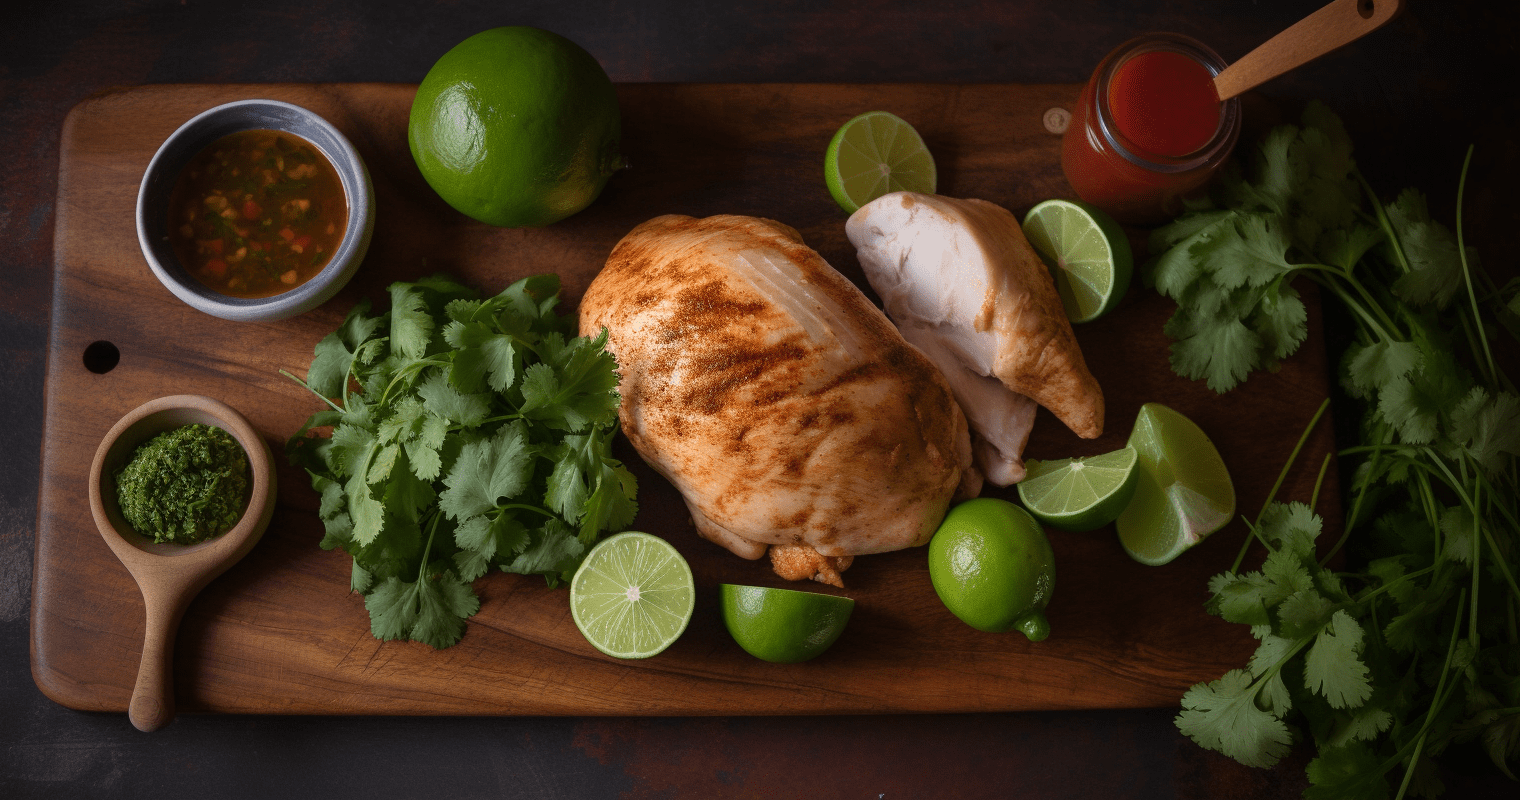 Chipotle Lime Grilled Chicken Final Dish